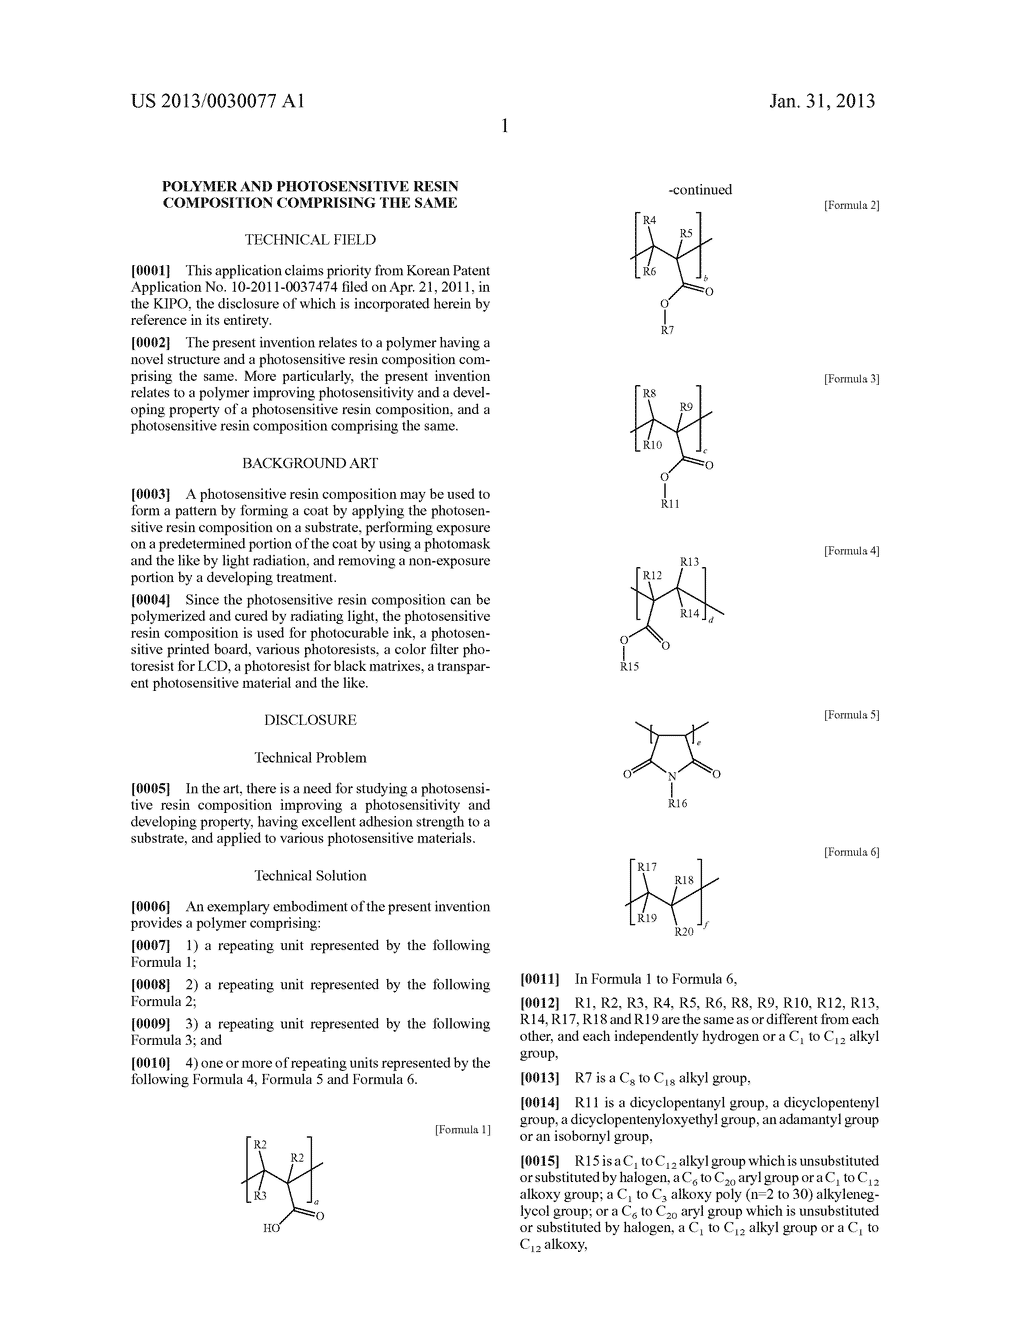 POLYMER AND PHOTOSENSITIVE RESIN COMPOSITION COMPRISING THE SAME - diagram, schematic, and image 08